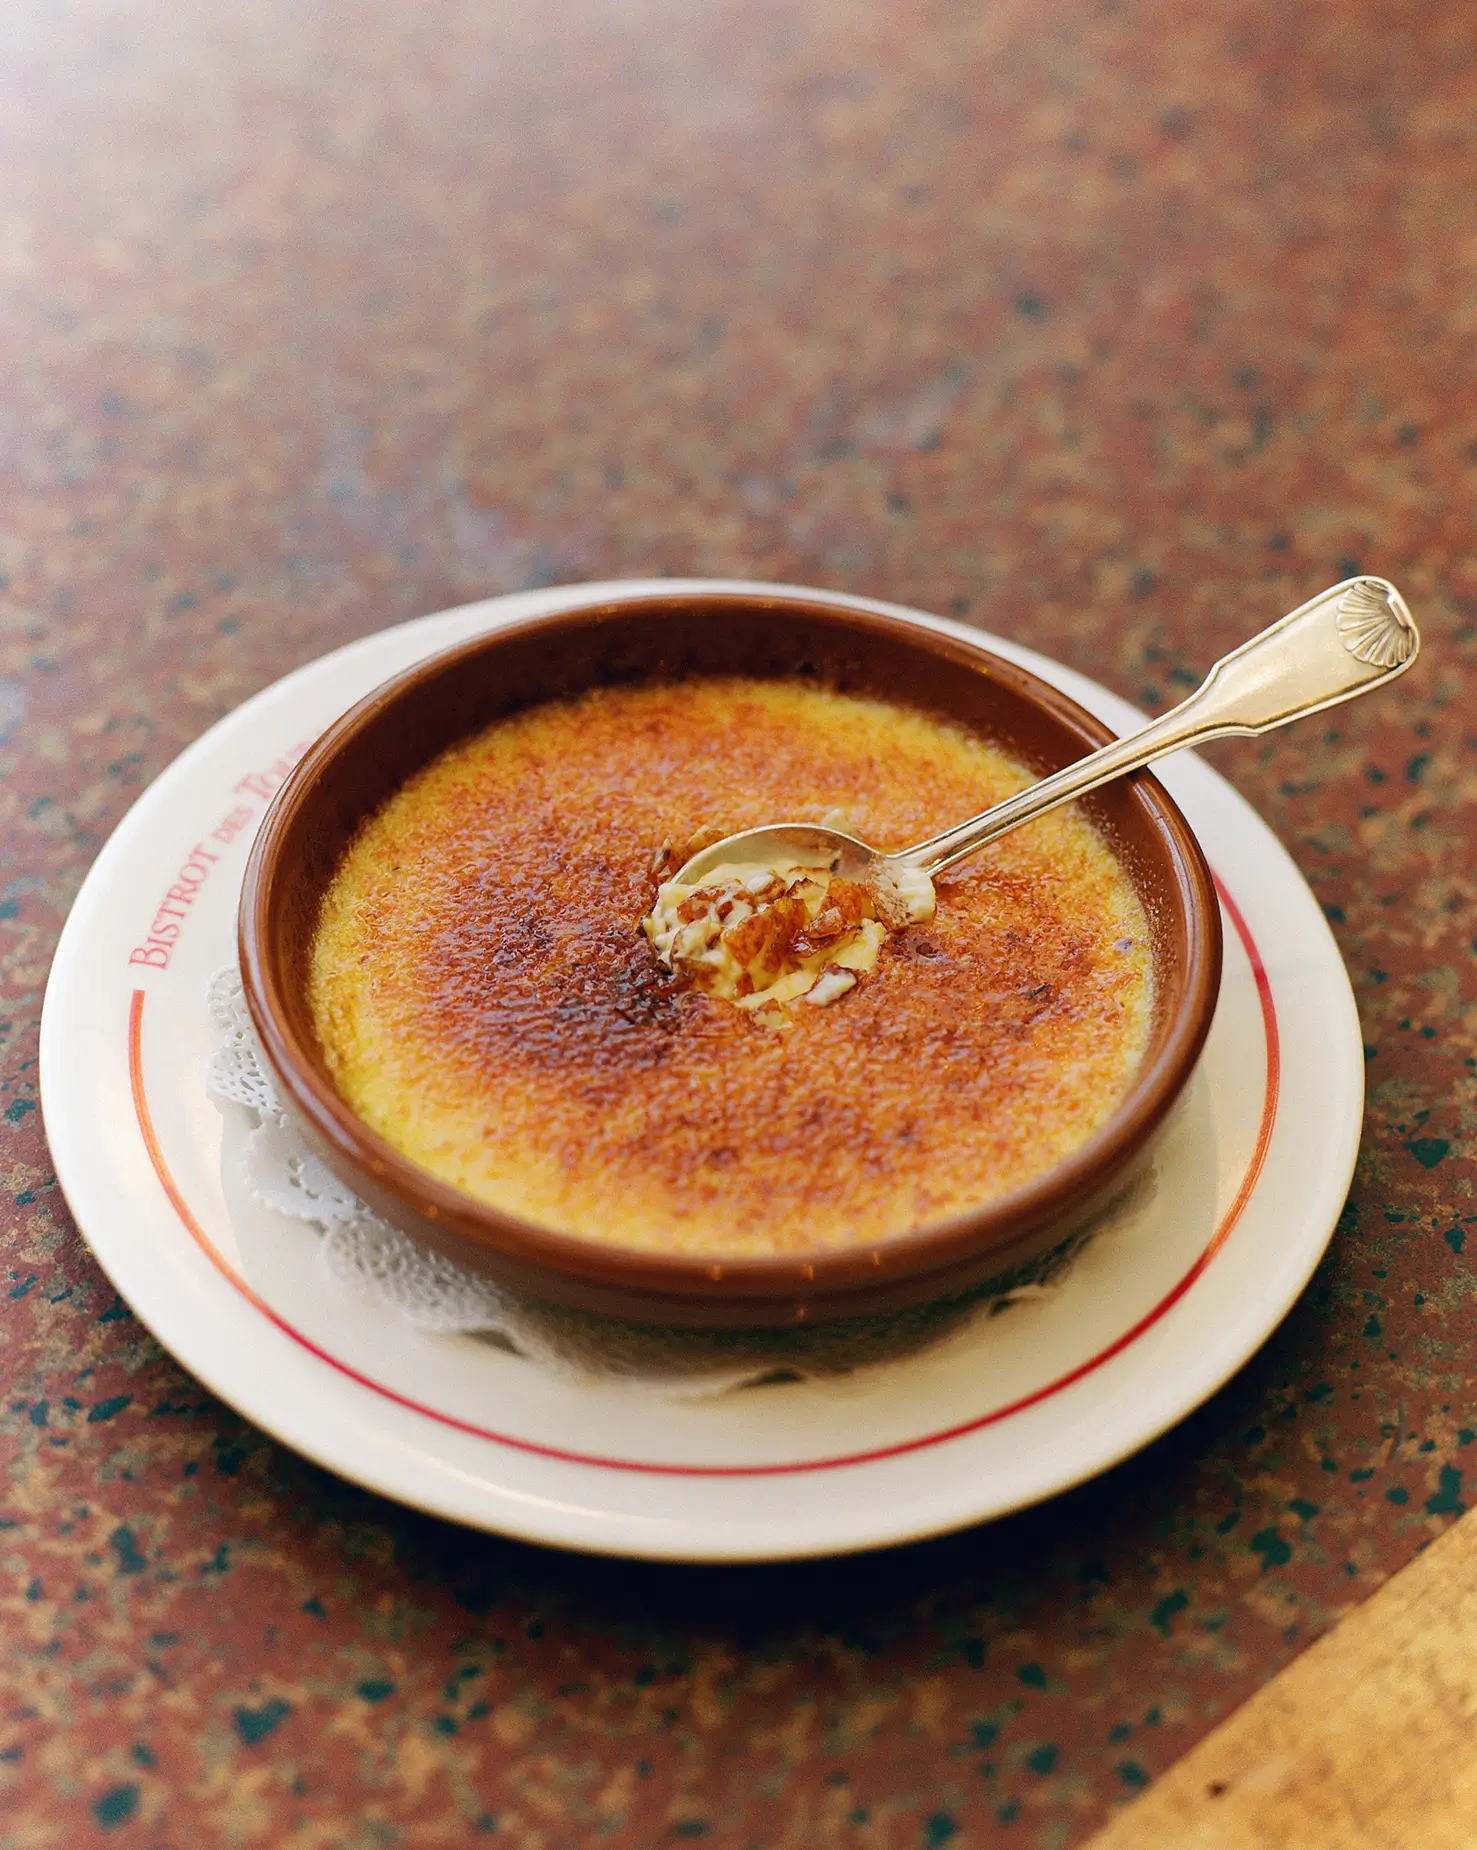 A classic crème brûlée with a caramelized top and a spoonful taken out, served at Bistrot Des Tournelles in Paris on a bistro-branded dish.